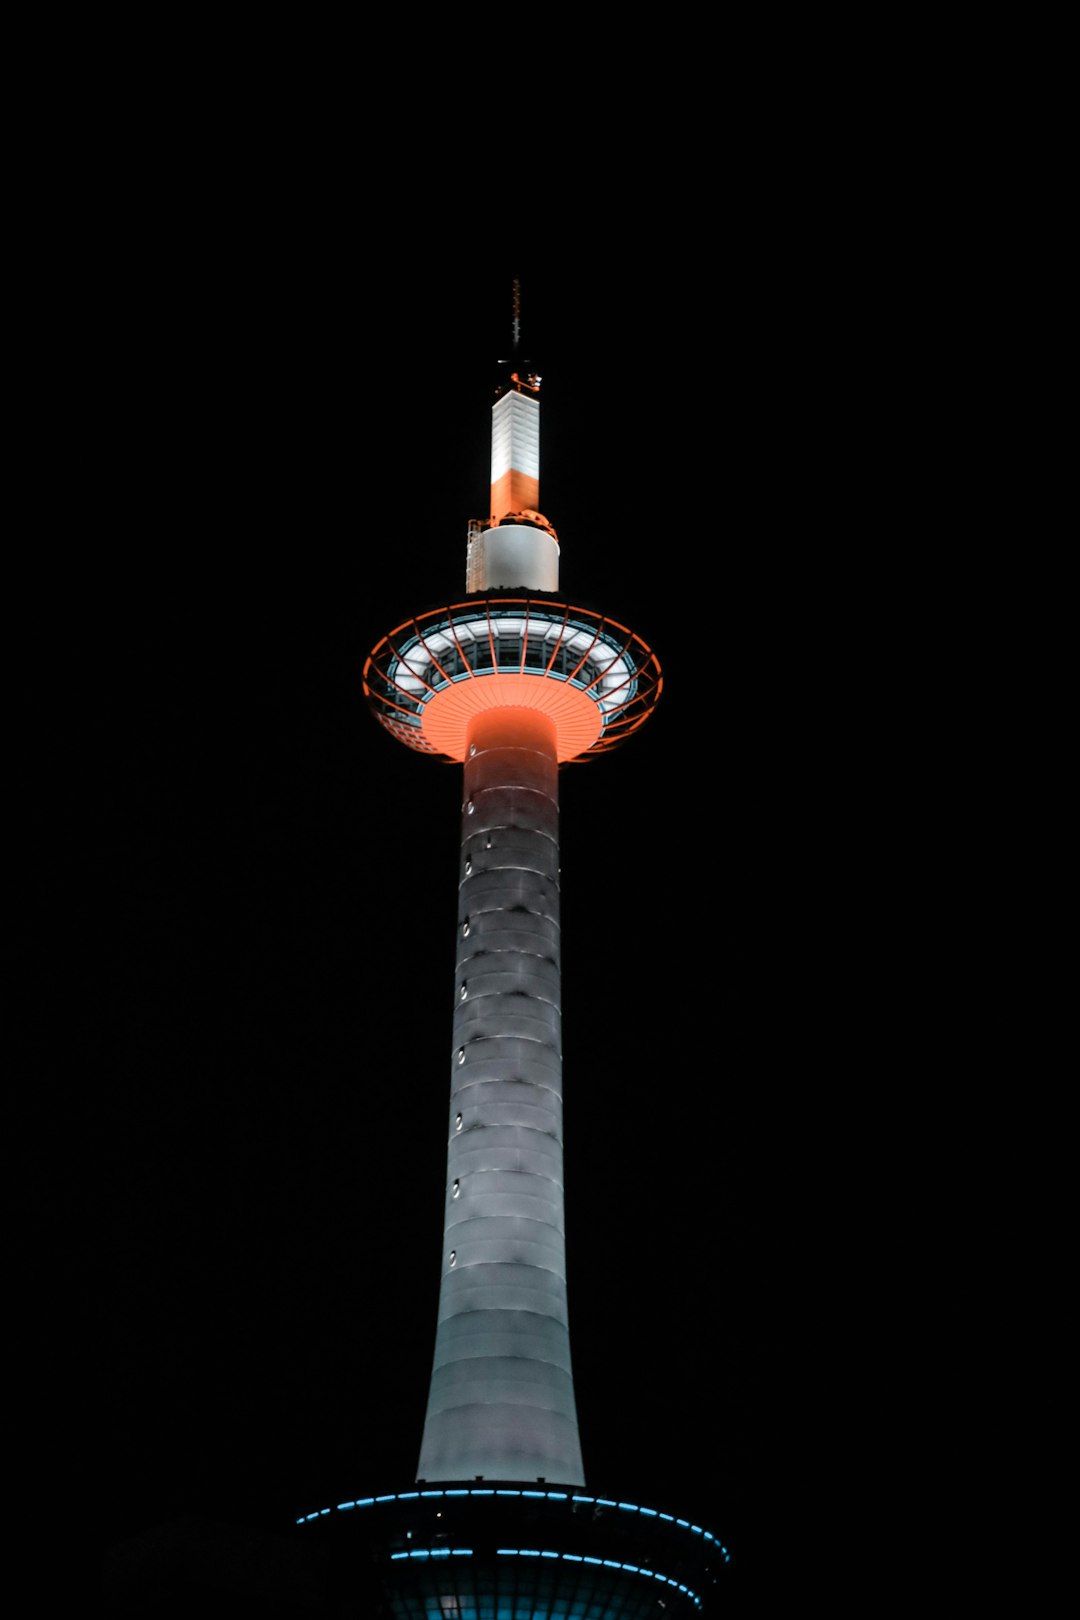 tower with lights on during night